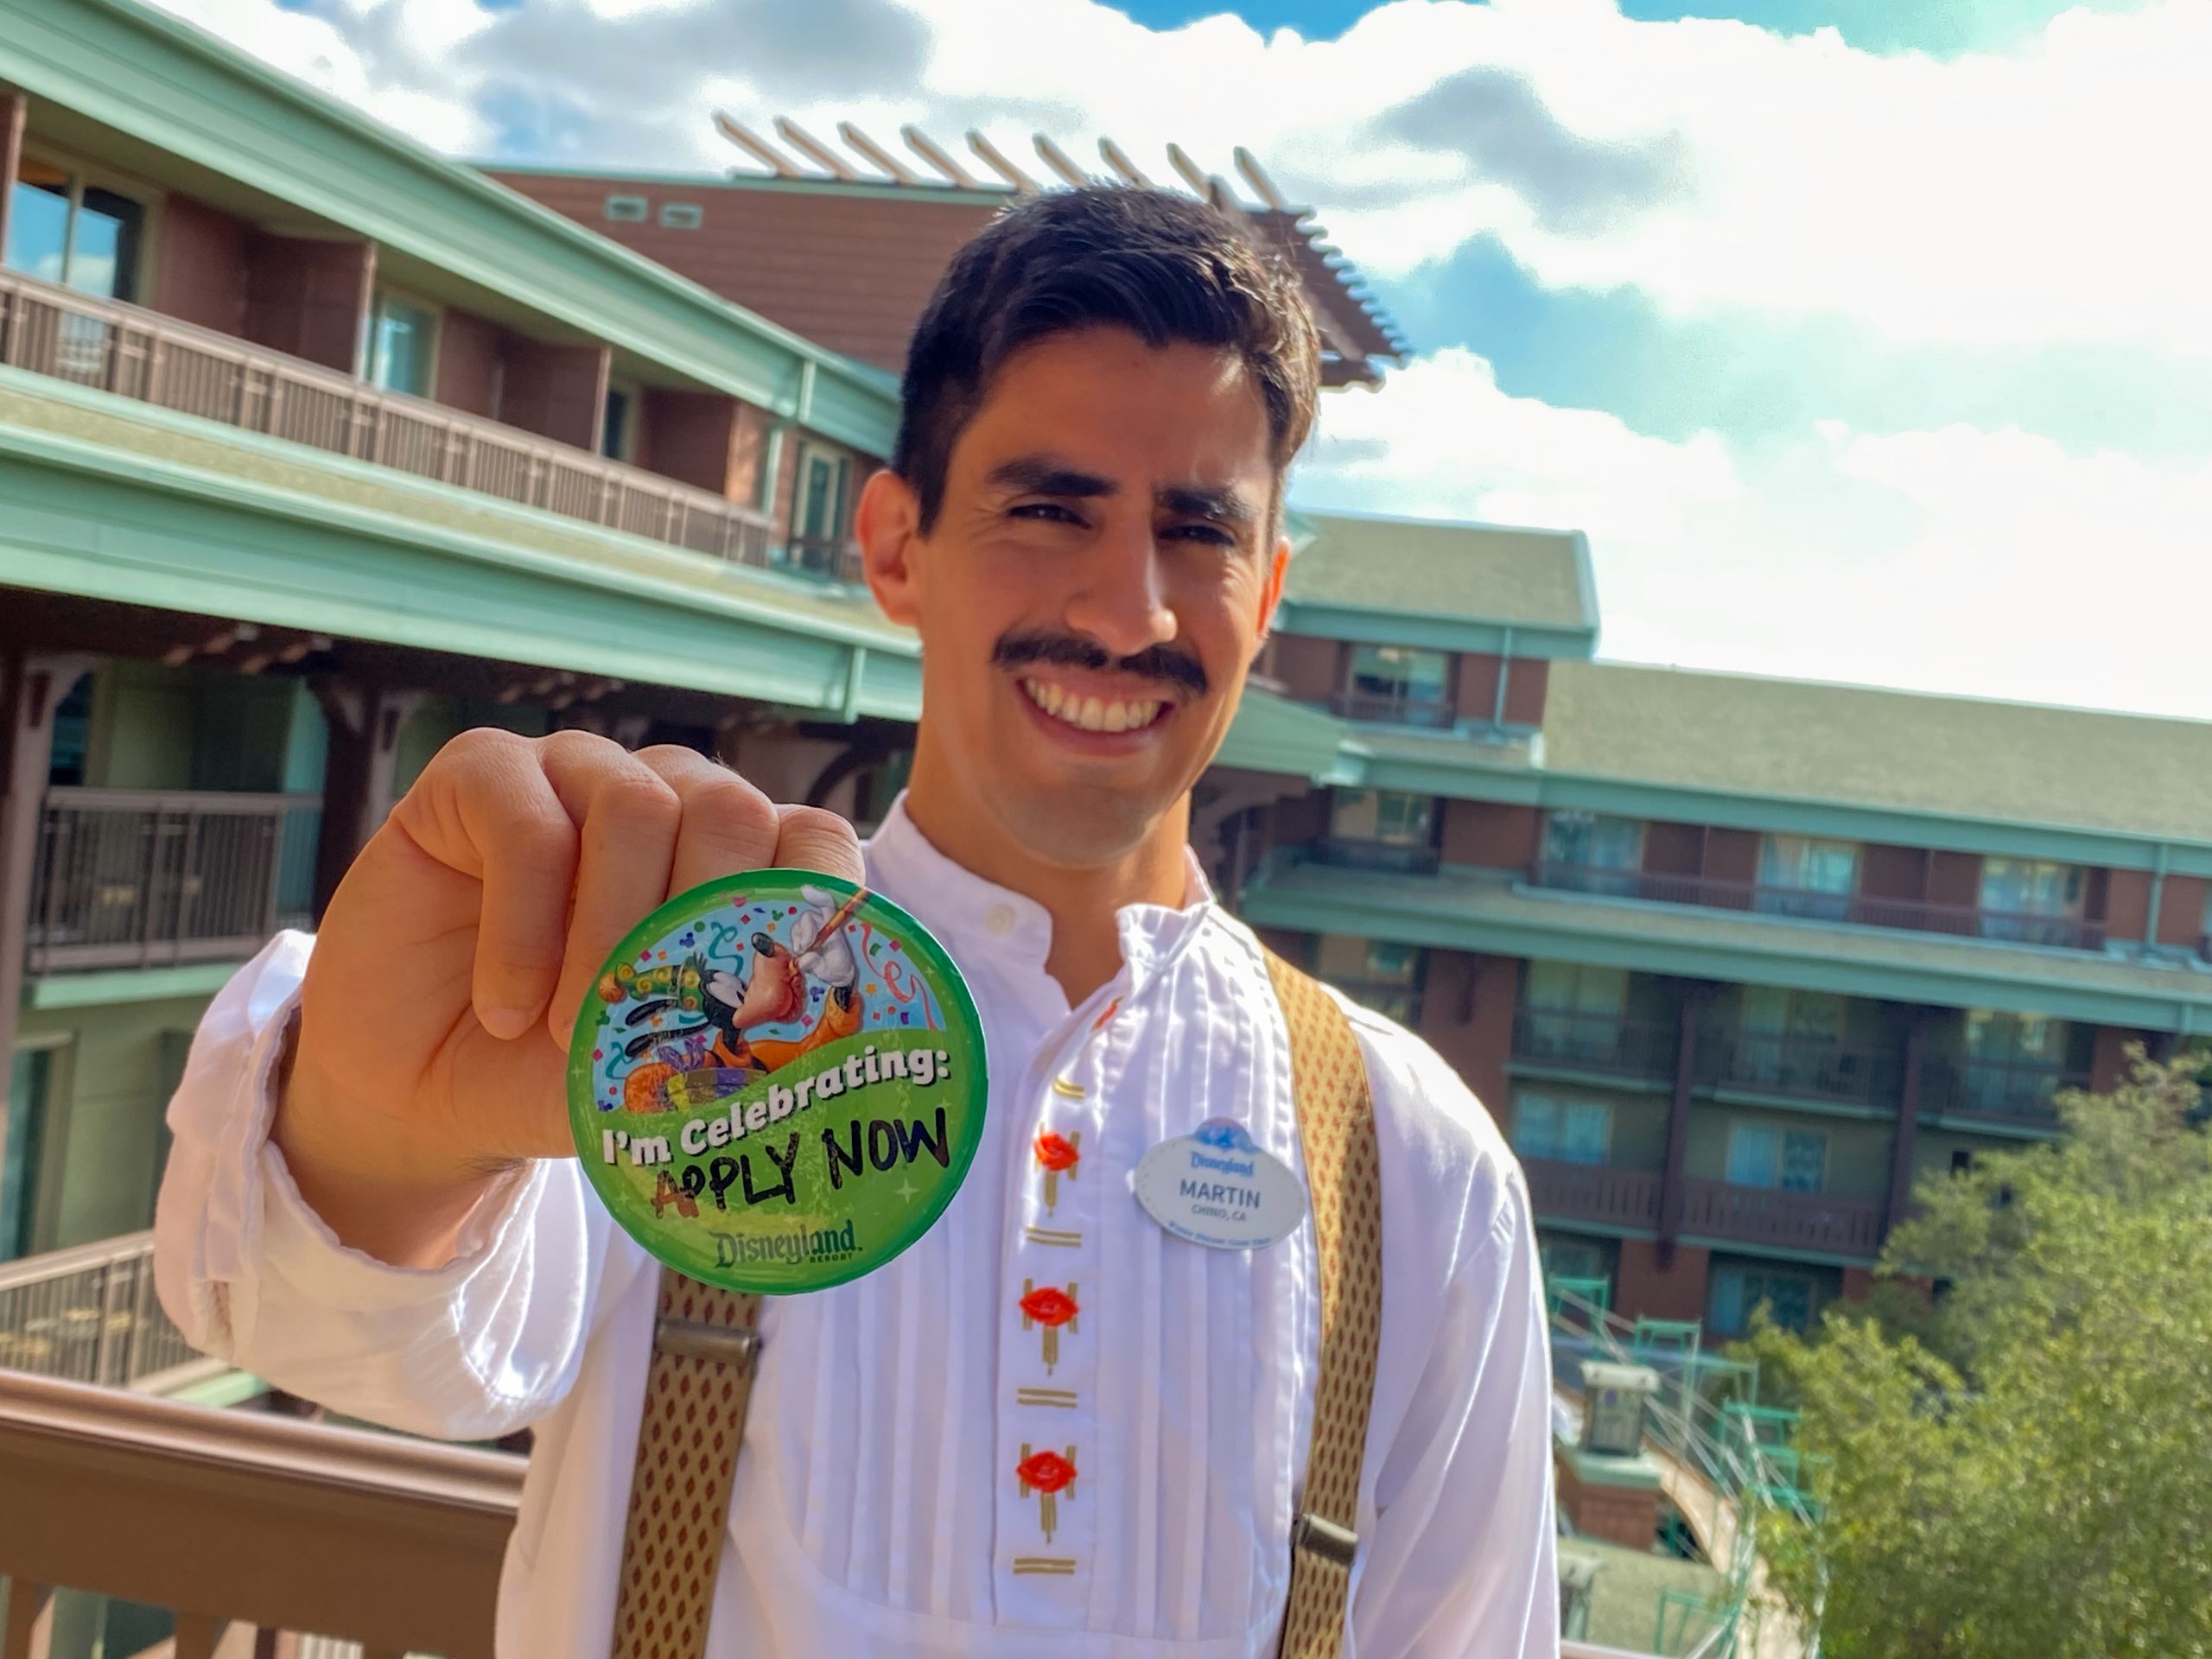 disneyland cast member holding an "im celebrating" button that says "apply now"